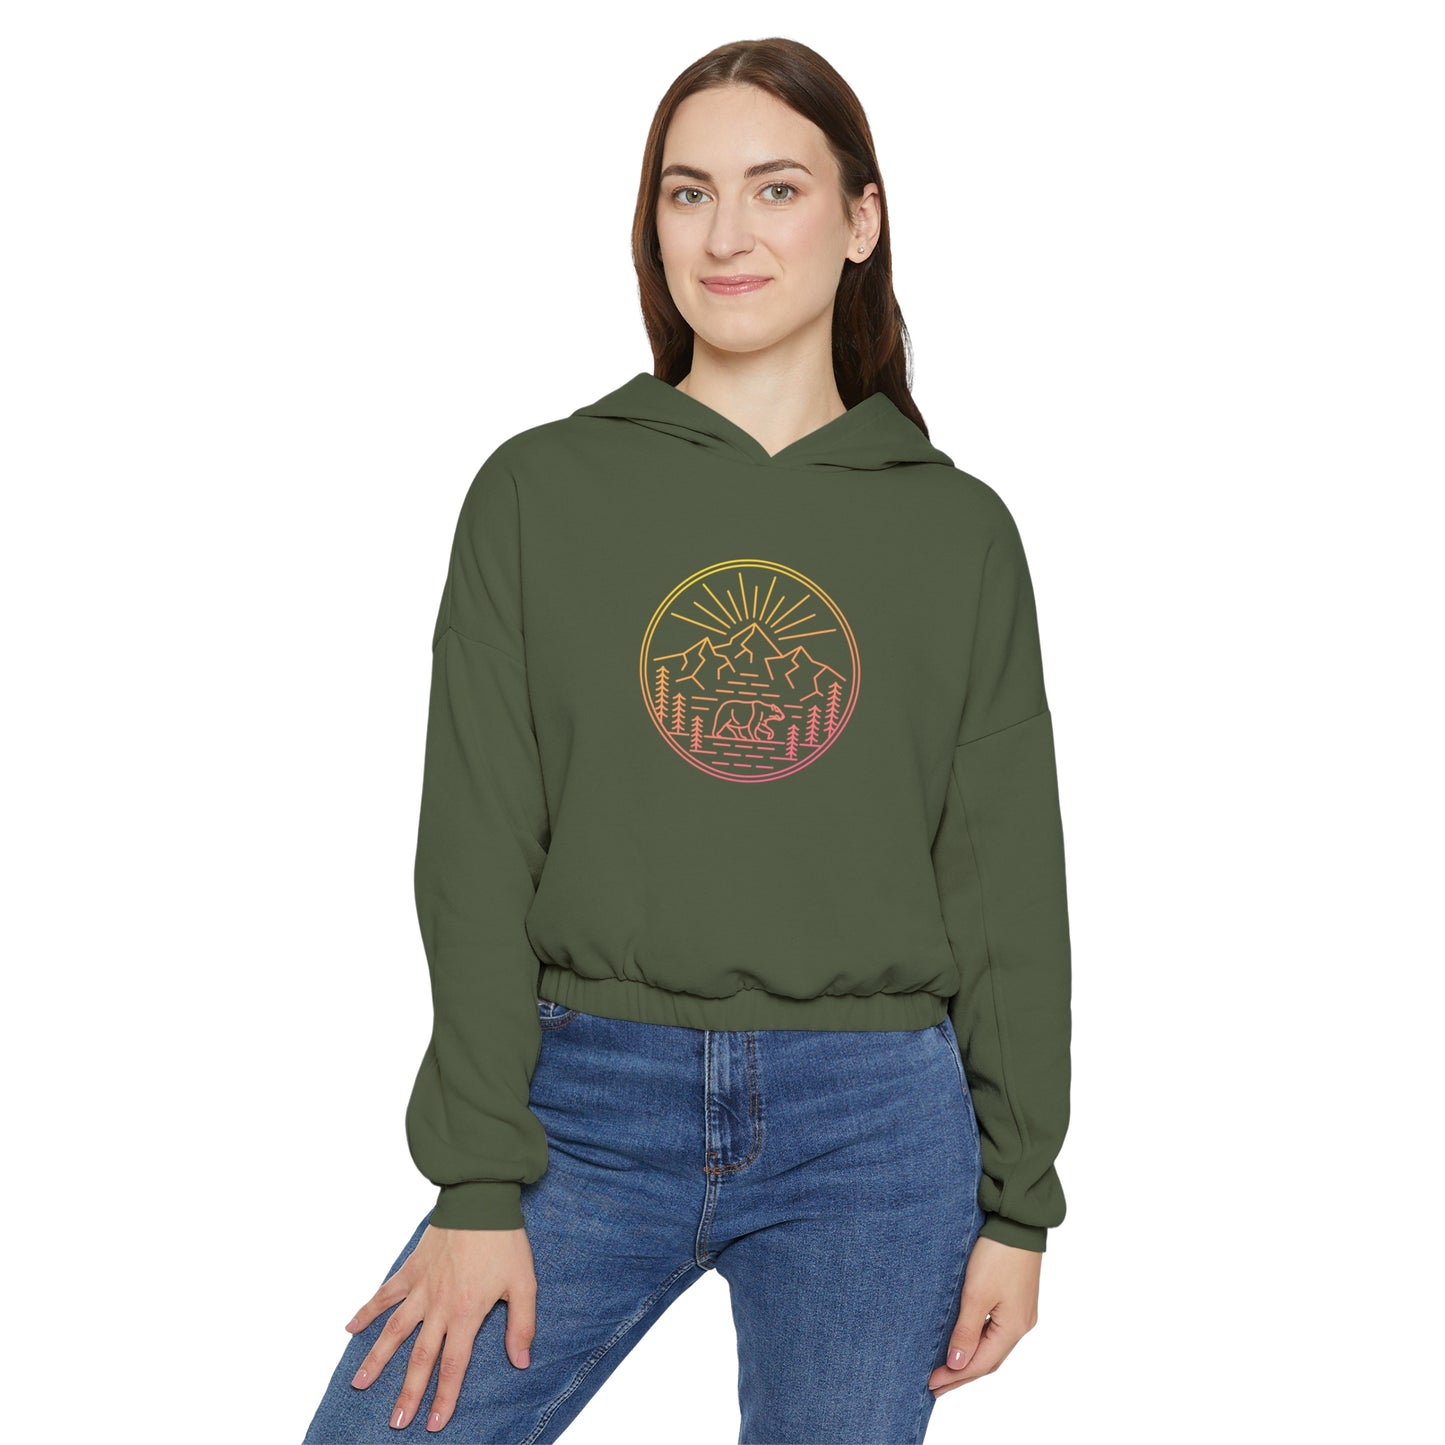 Explore The Outdoors. Women's Cinched Bottom Hoodie